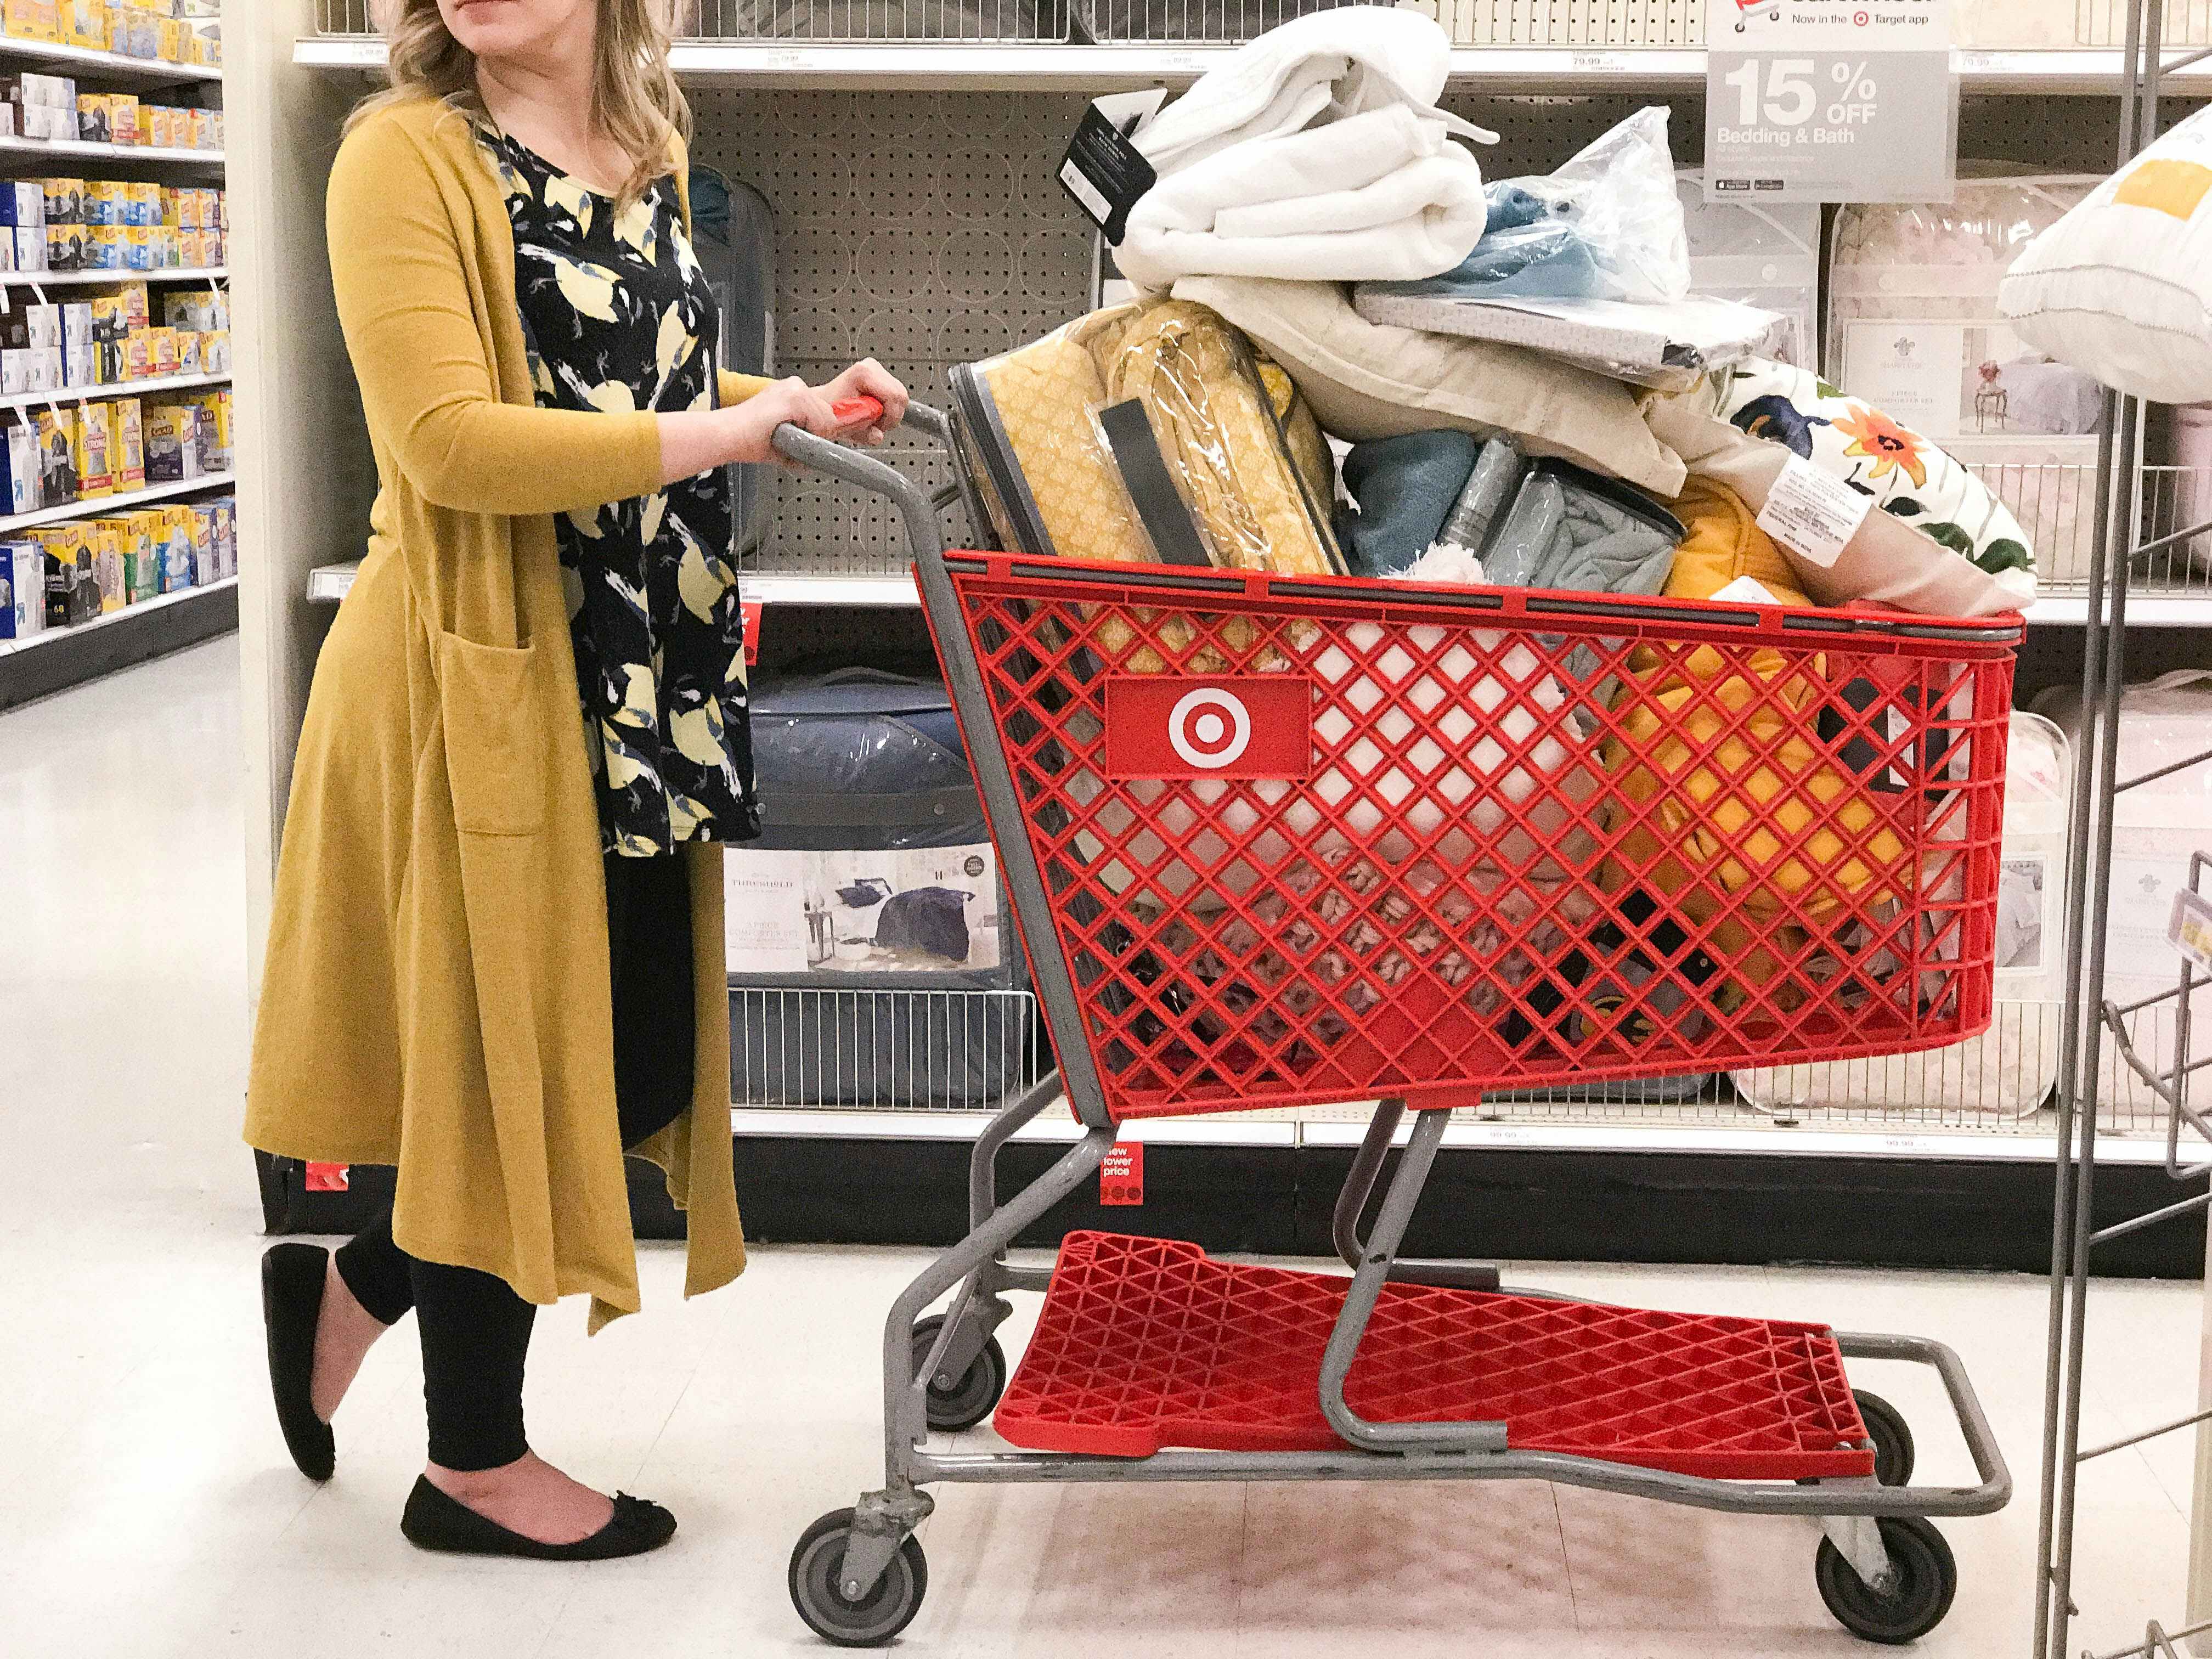 A woman pushing a target shipping car filled with bedding, towels and home items.